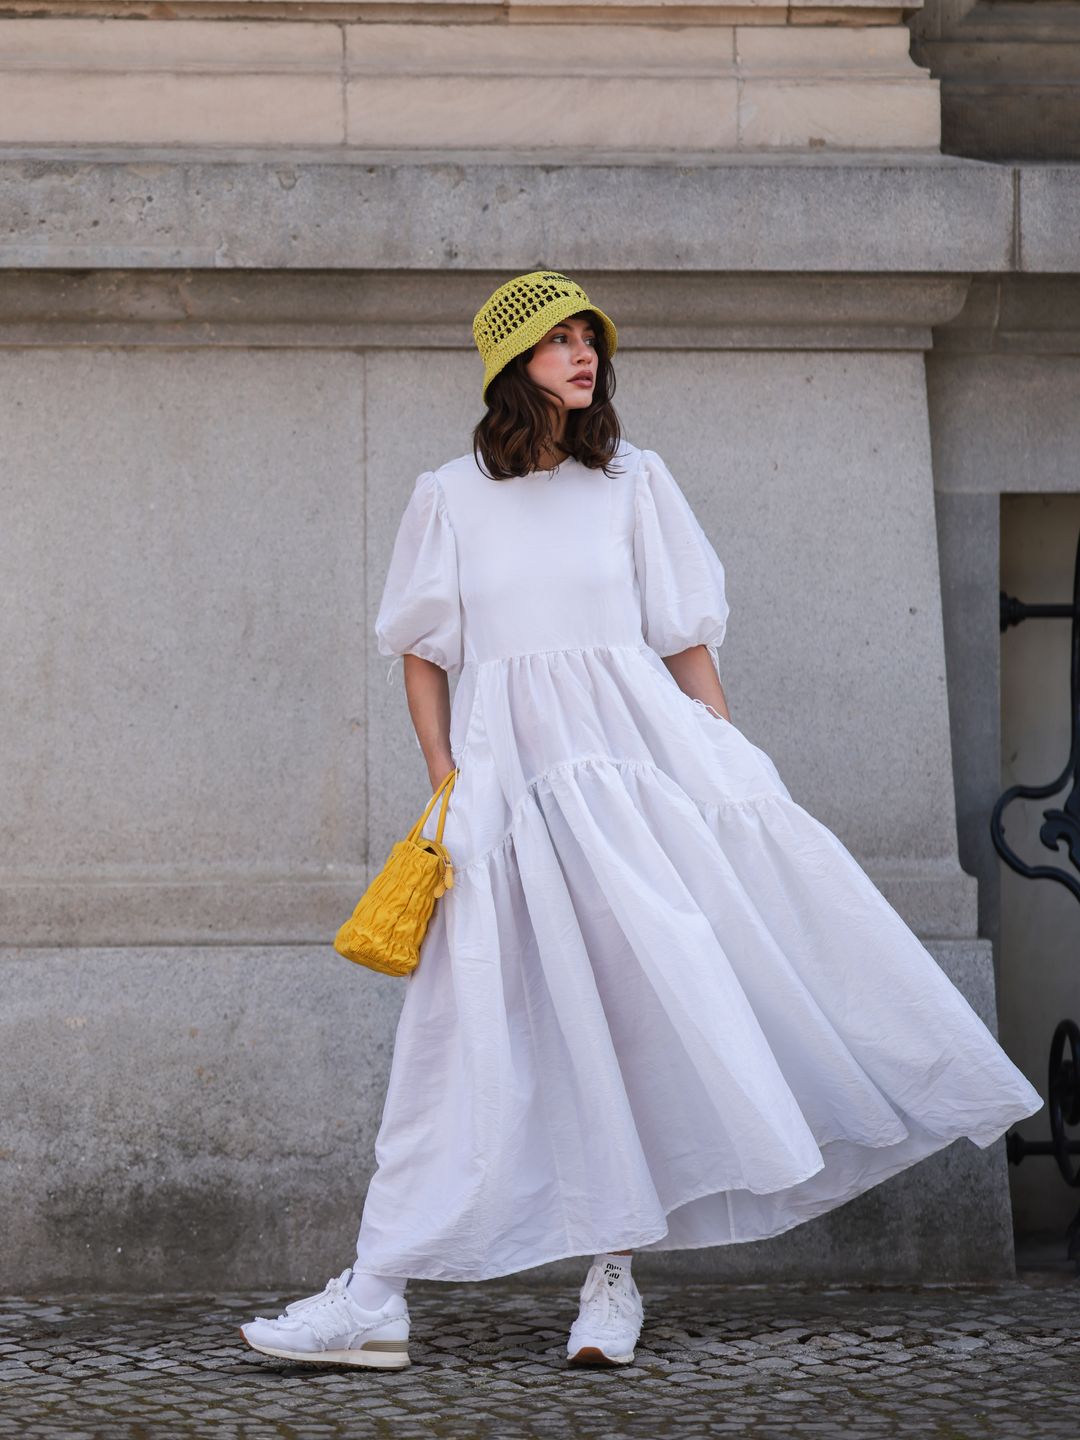 Lena Naumann styles a white tiered dress with sneakers from New Balance x Miu Miu's limited-edition collection 